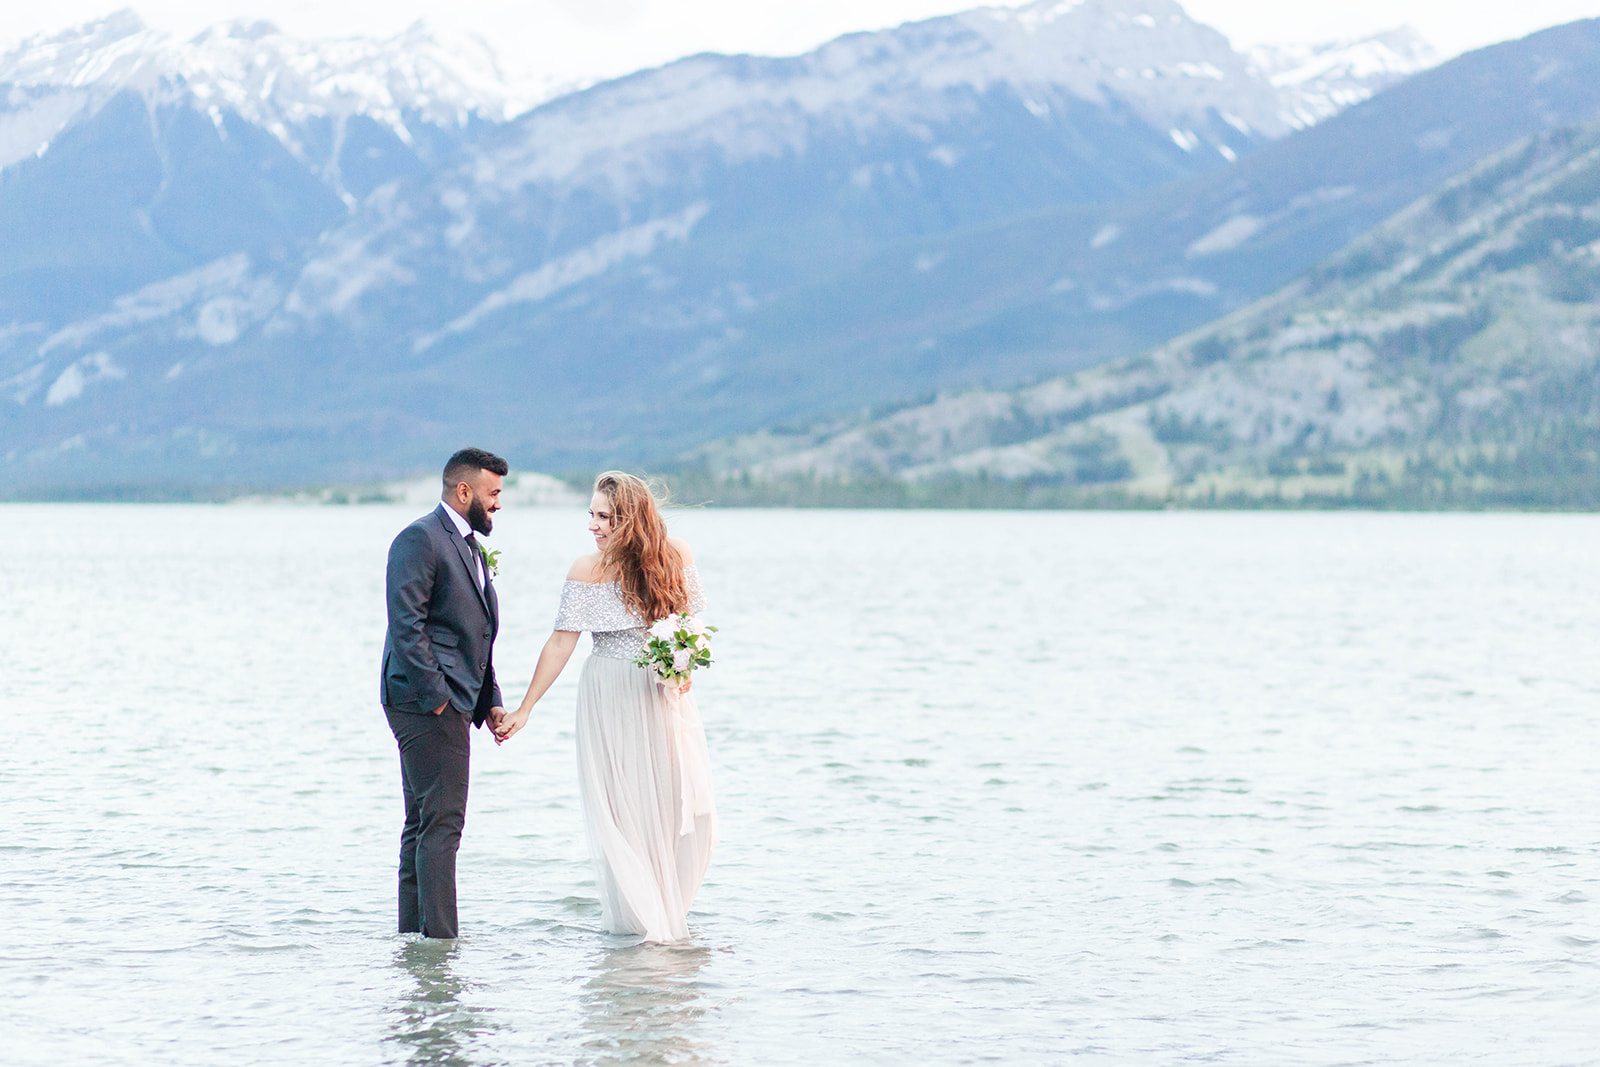 7 tips for choosing your wedding photographer - pro tip from Kayla Lynn